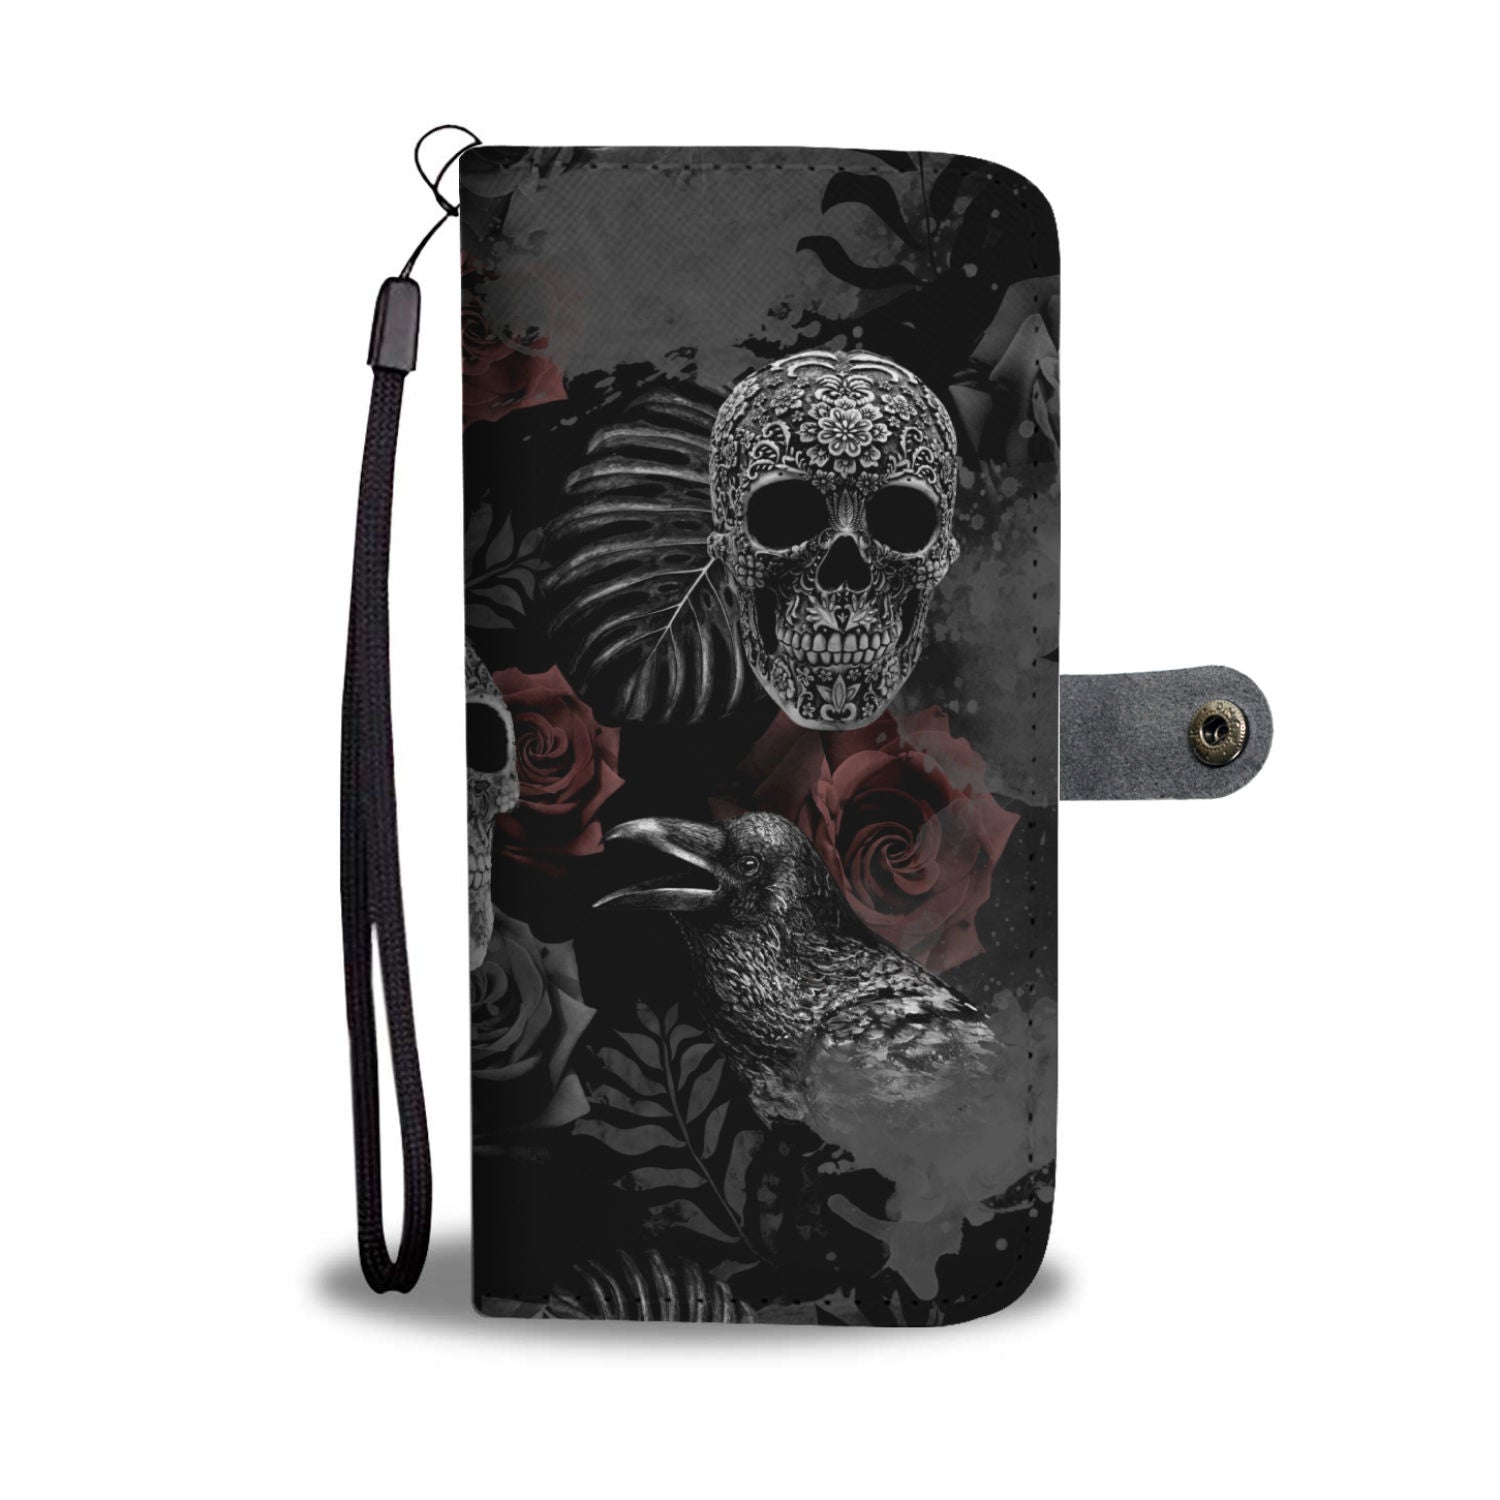 Skulls and Roses Phone Wallet Case - 70+ Phone Models Supported